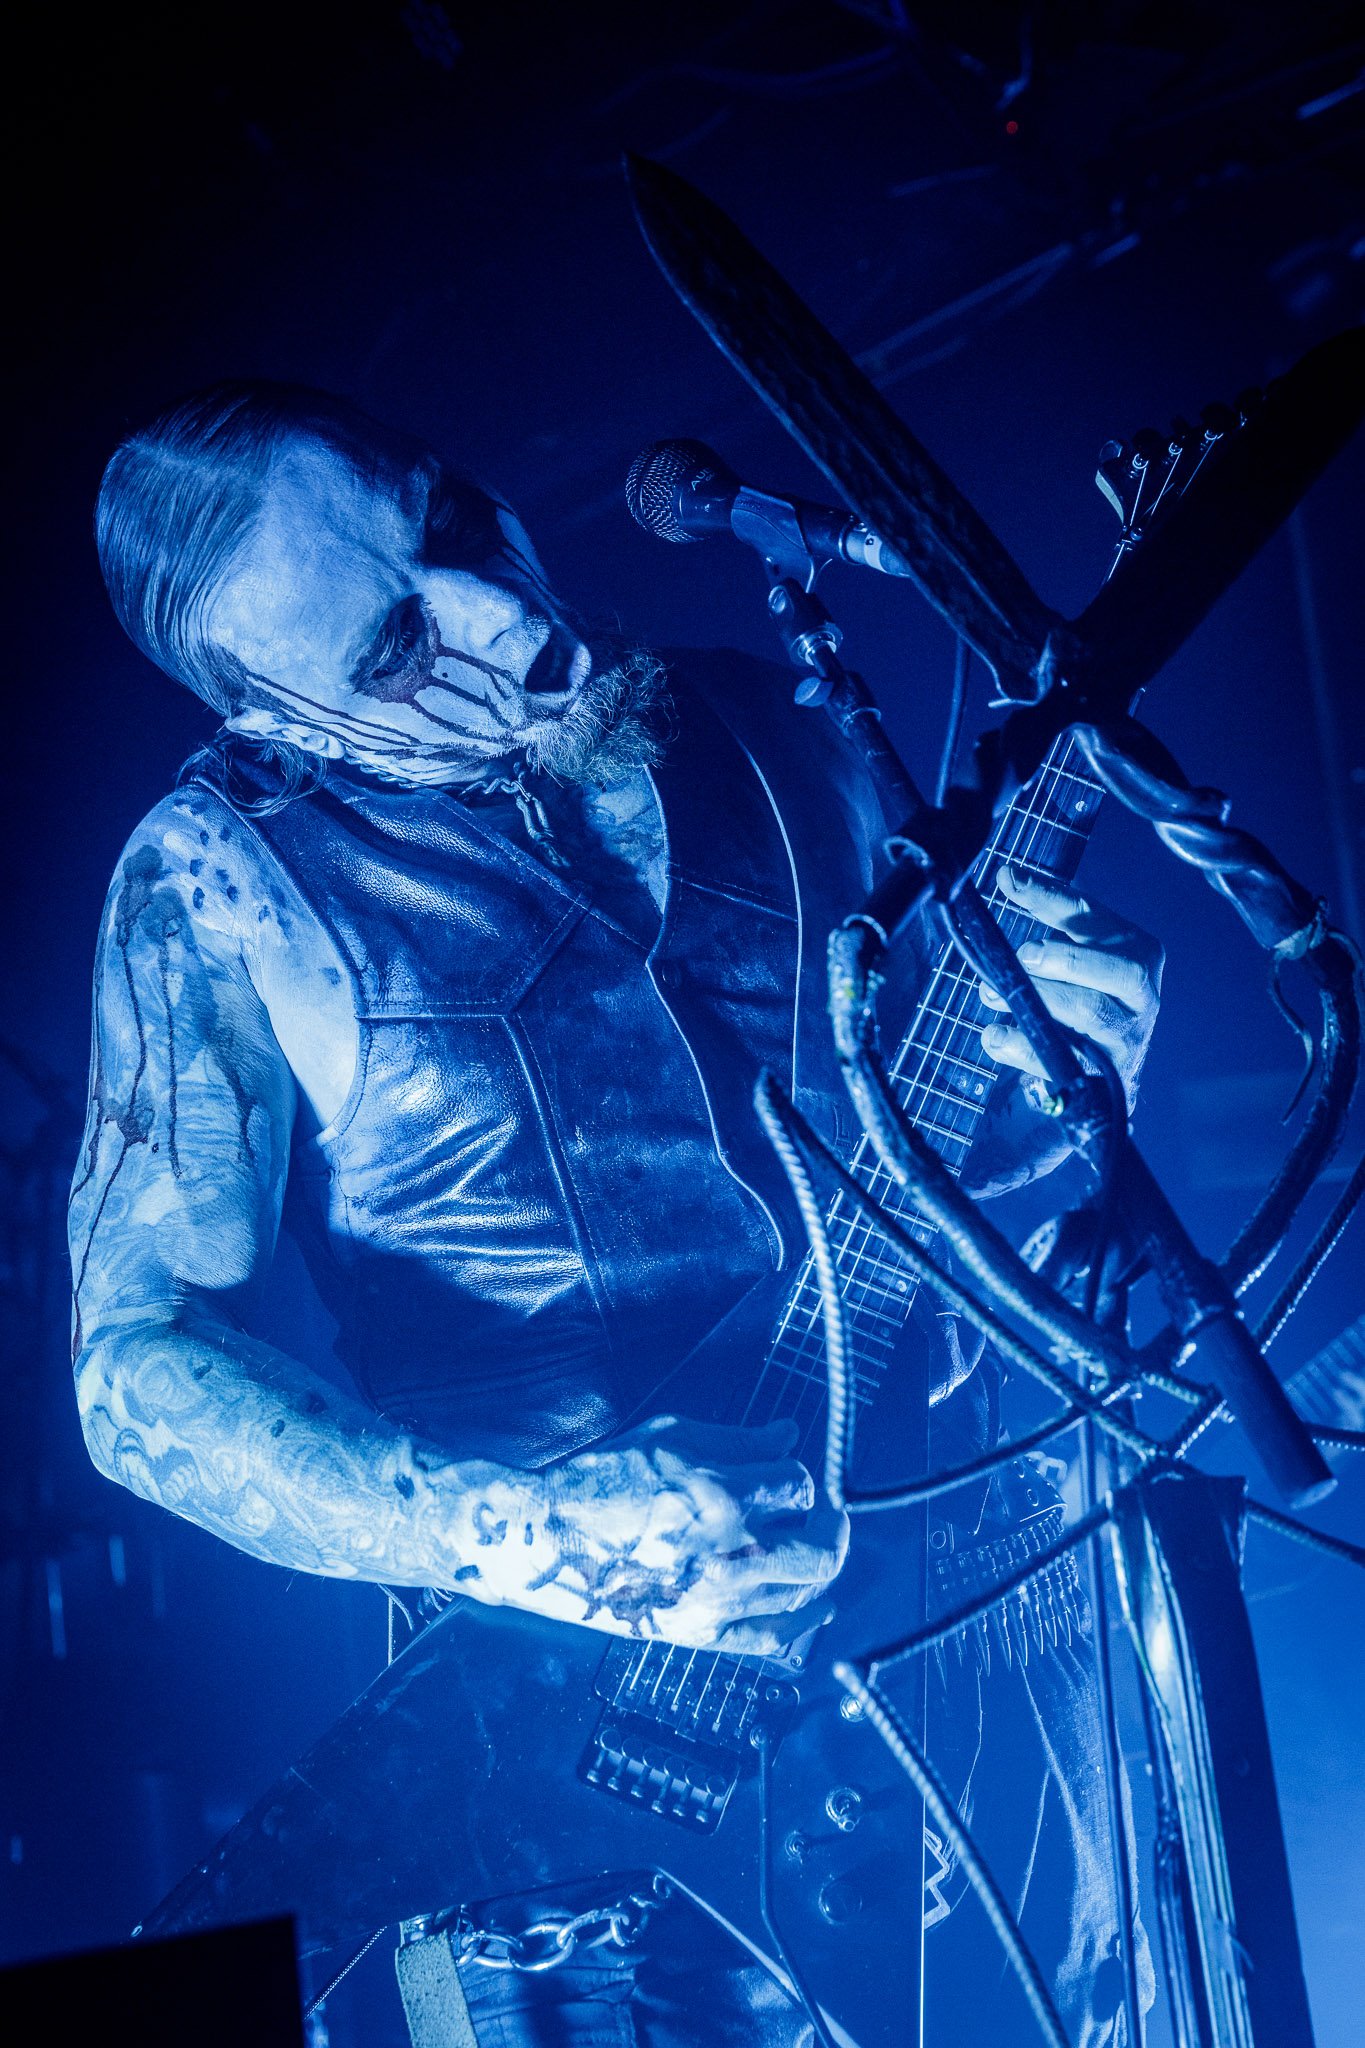 Belphegor at the Bread Shed in Manchester on November 18th 2021 